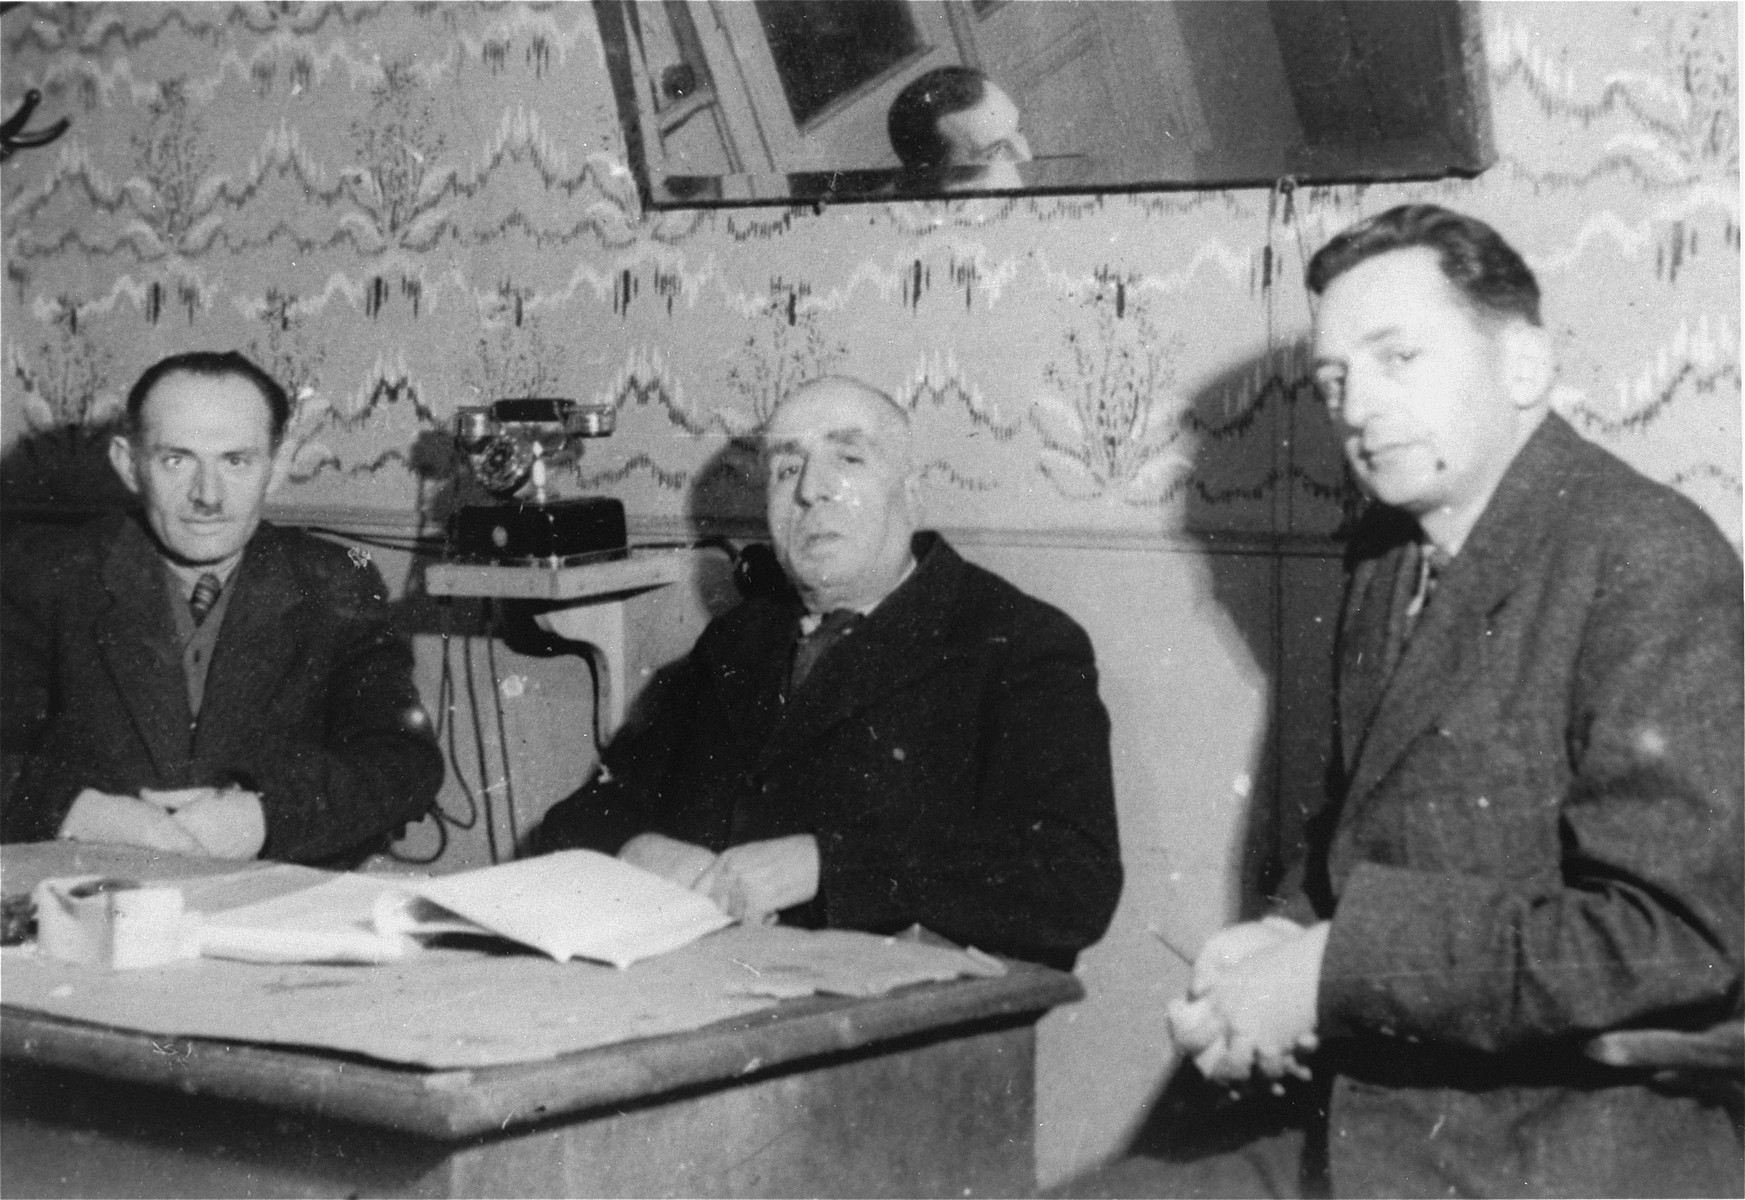 Three members of the ghetto administration sits around a table in the office of the Judenrat in the Kielce ghetto.

This photo was one the images included in an official album prepared by the Judenrat of the Kielce ghetto in 1942.